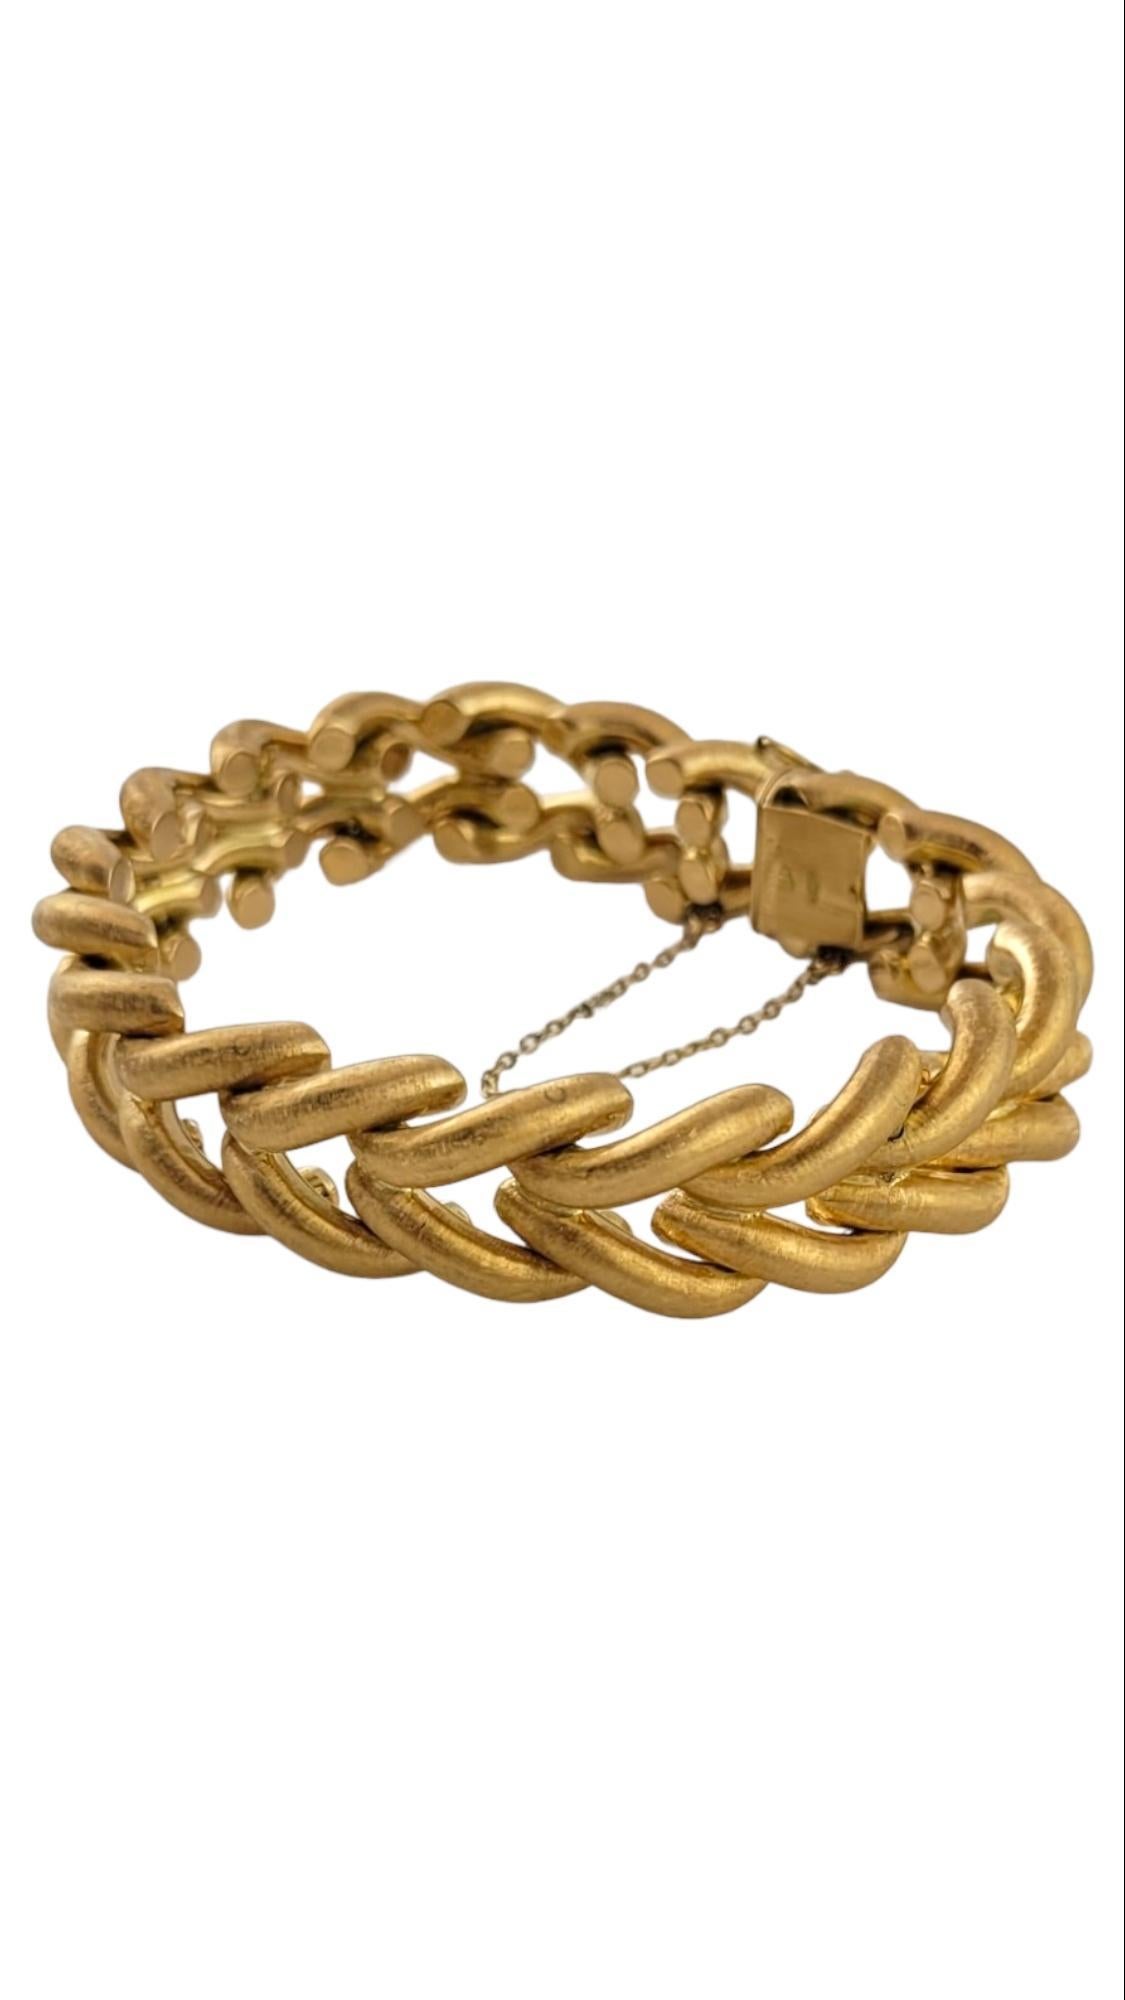 Vintage 18K Yellow Gold Mario Buccellati San Marco Bracelet

This gorgeous San Marco bracelet by designer Mario Buccellati is crafted from 18K yellow gold with beautiful detailing!

Size: 7